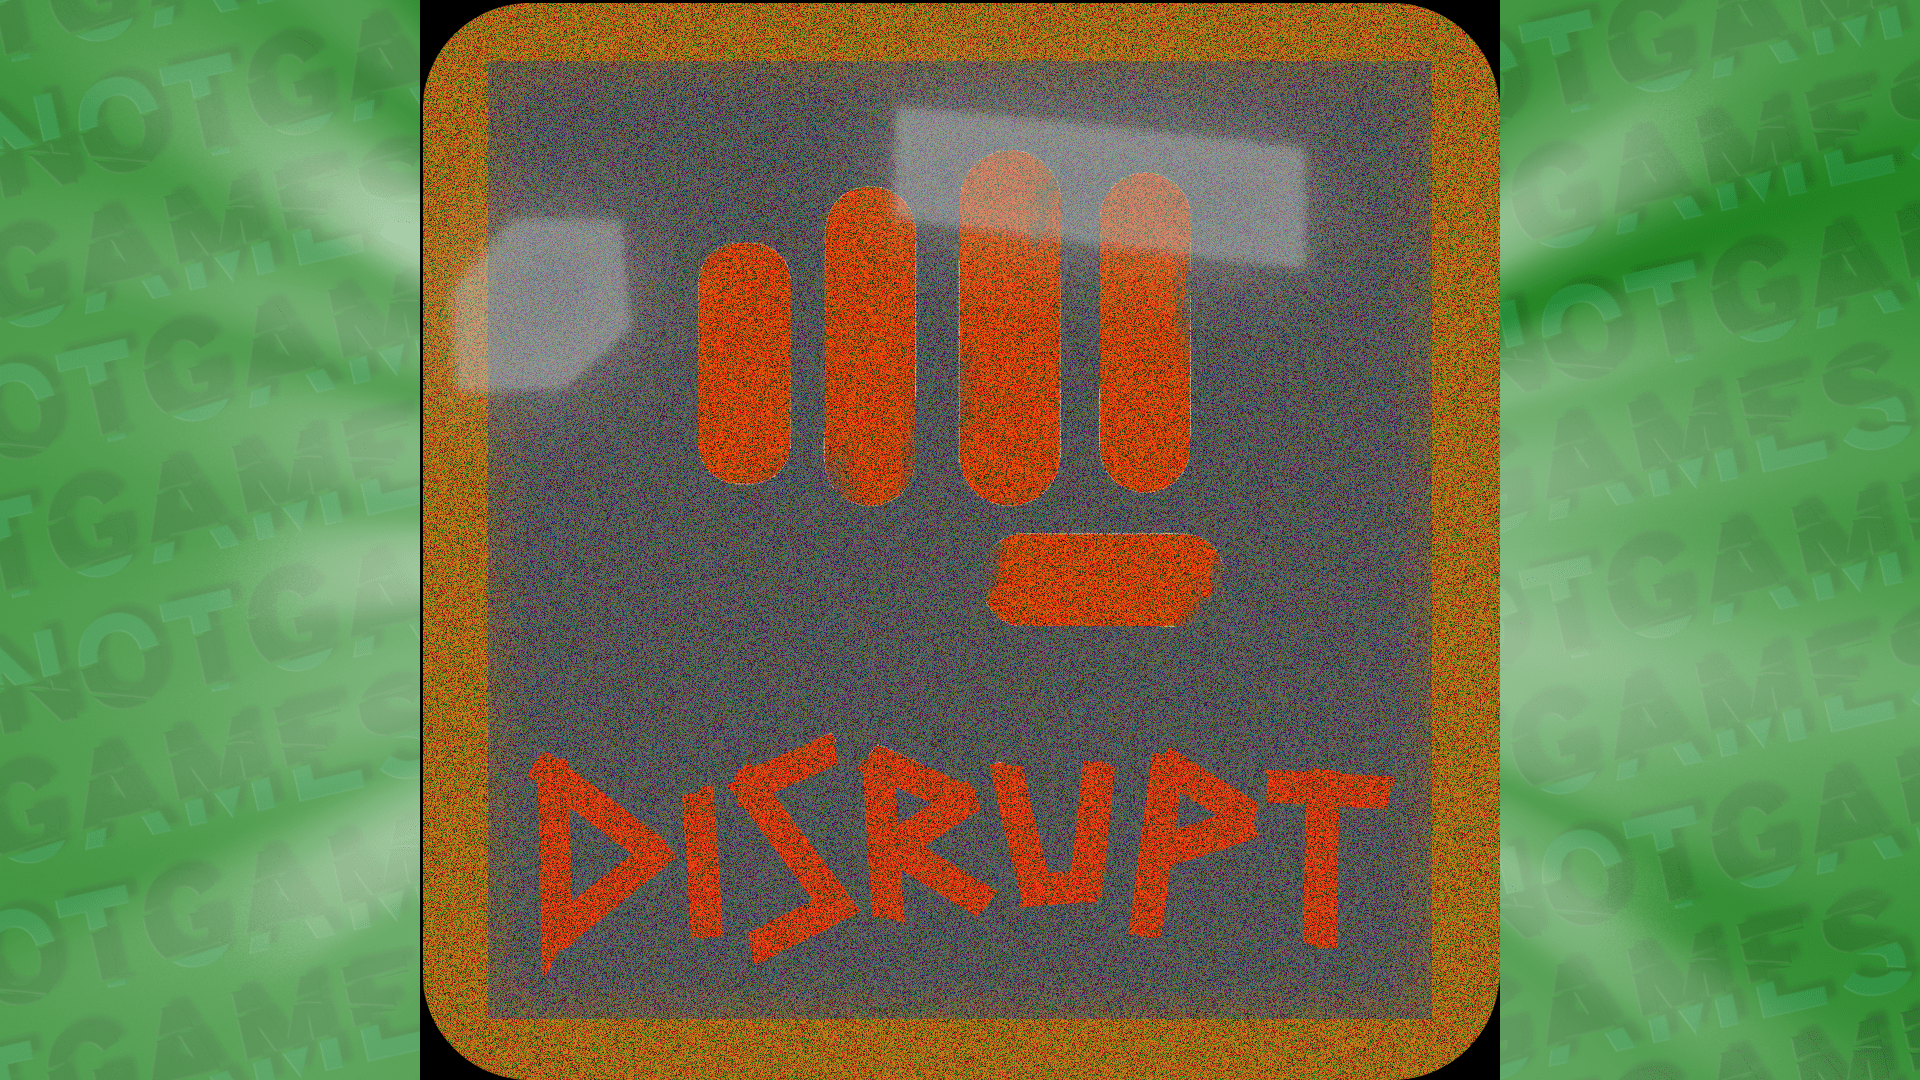 Icon for A Disruptive Payout